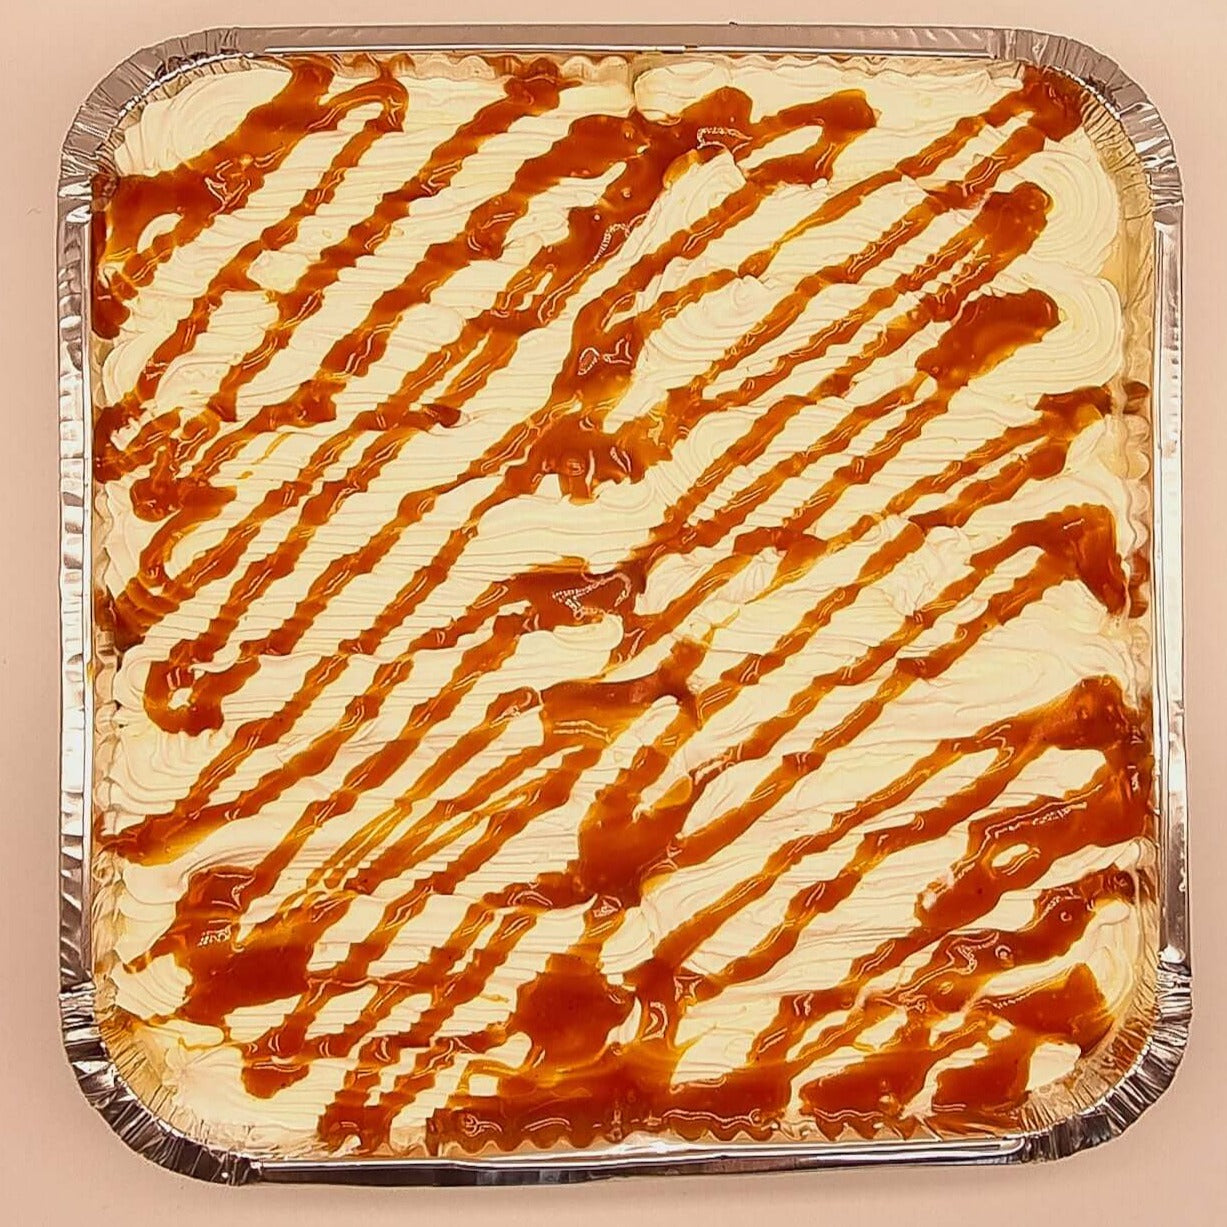 Delectable caramel milk cake tray with a luscious caramel drizzle